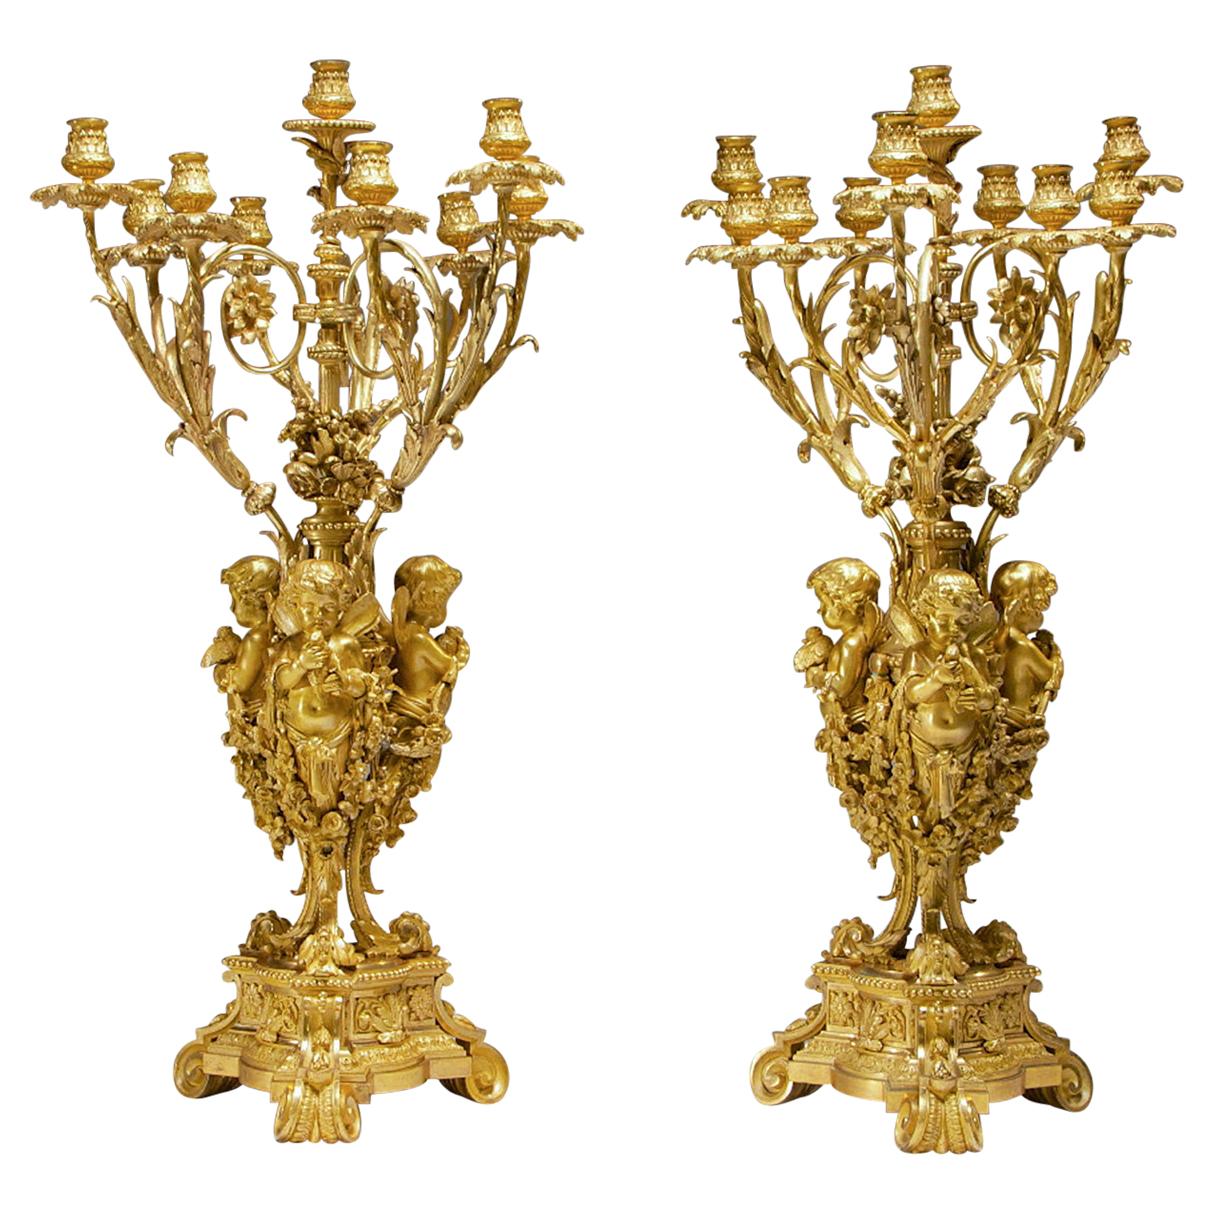 Important Pair of 19th Century French Ormolu Ten-Light Candelabra by H. Picard